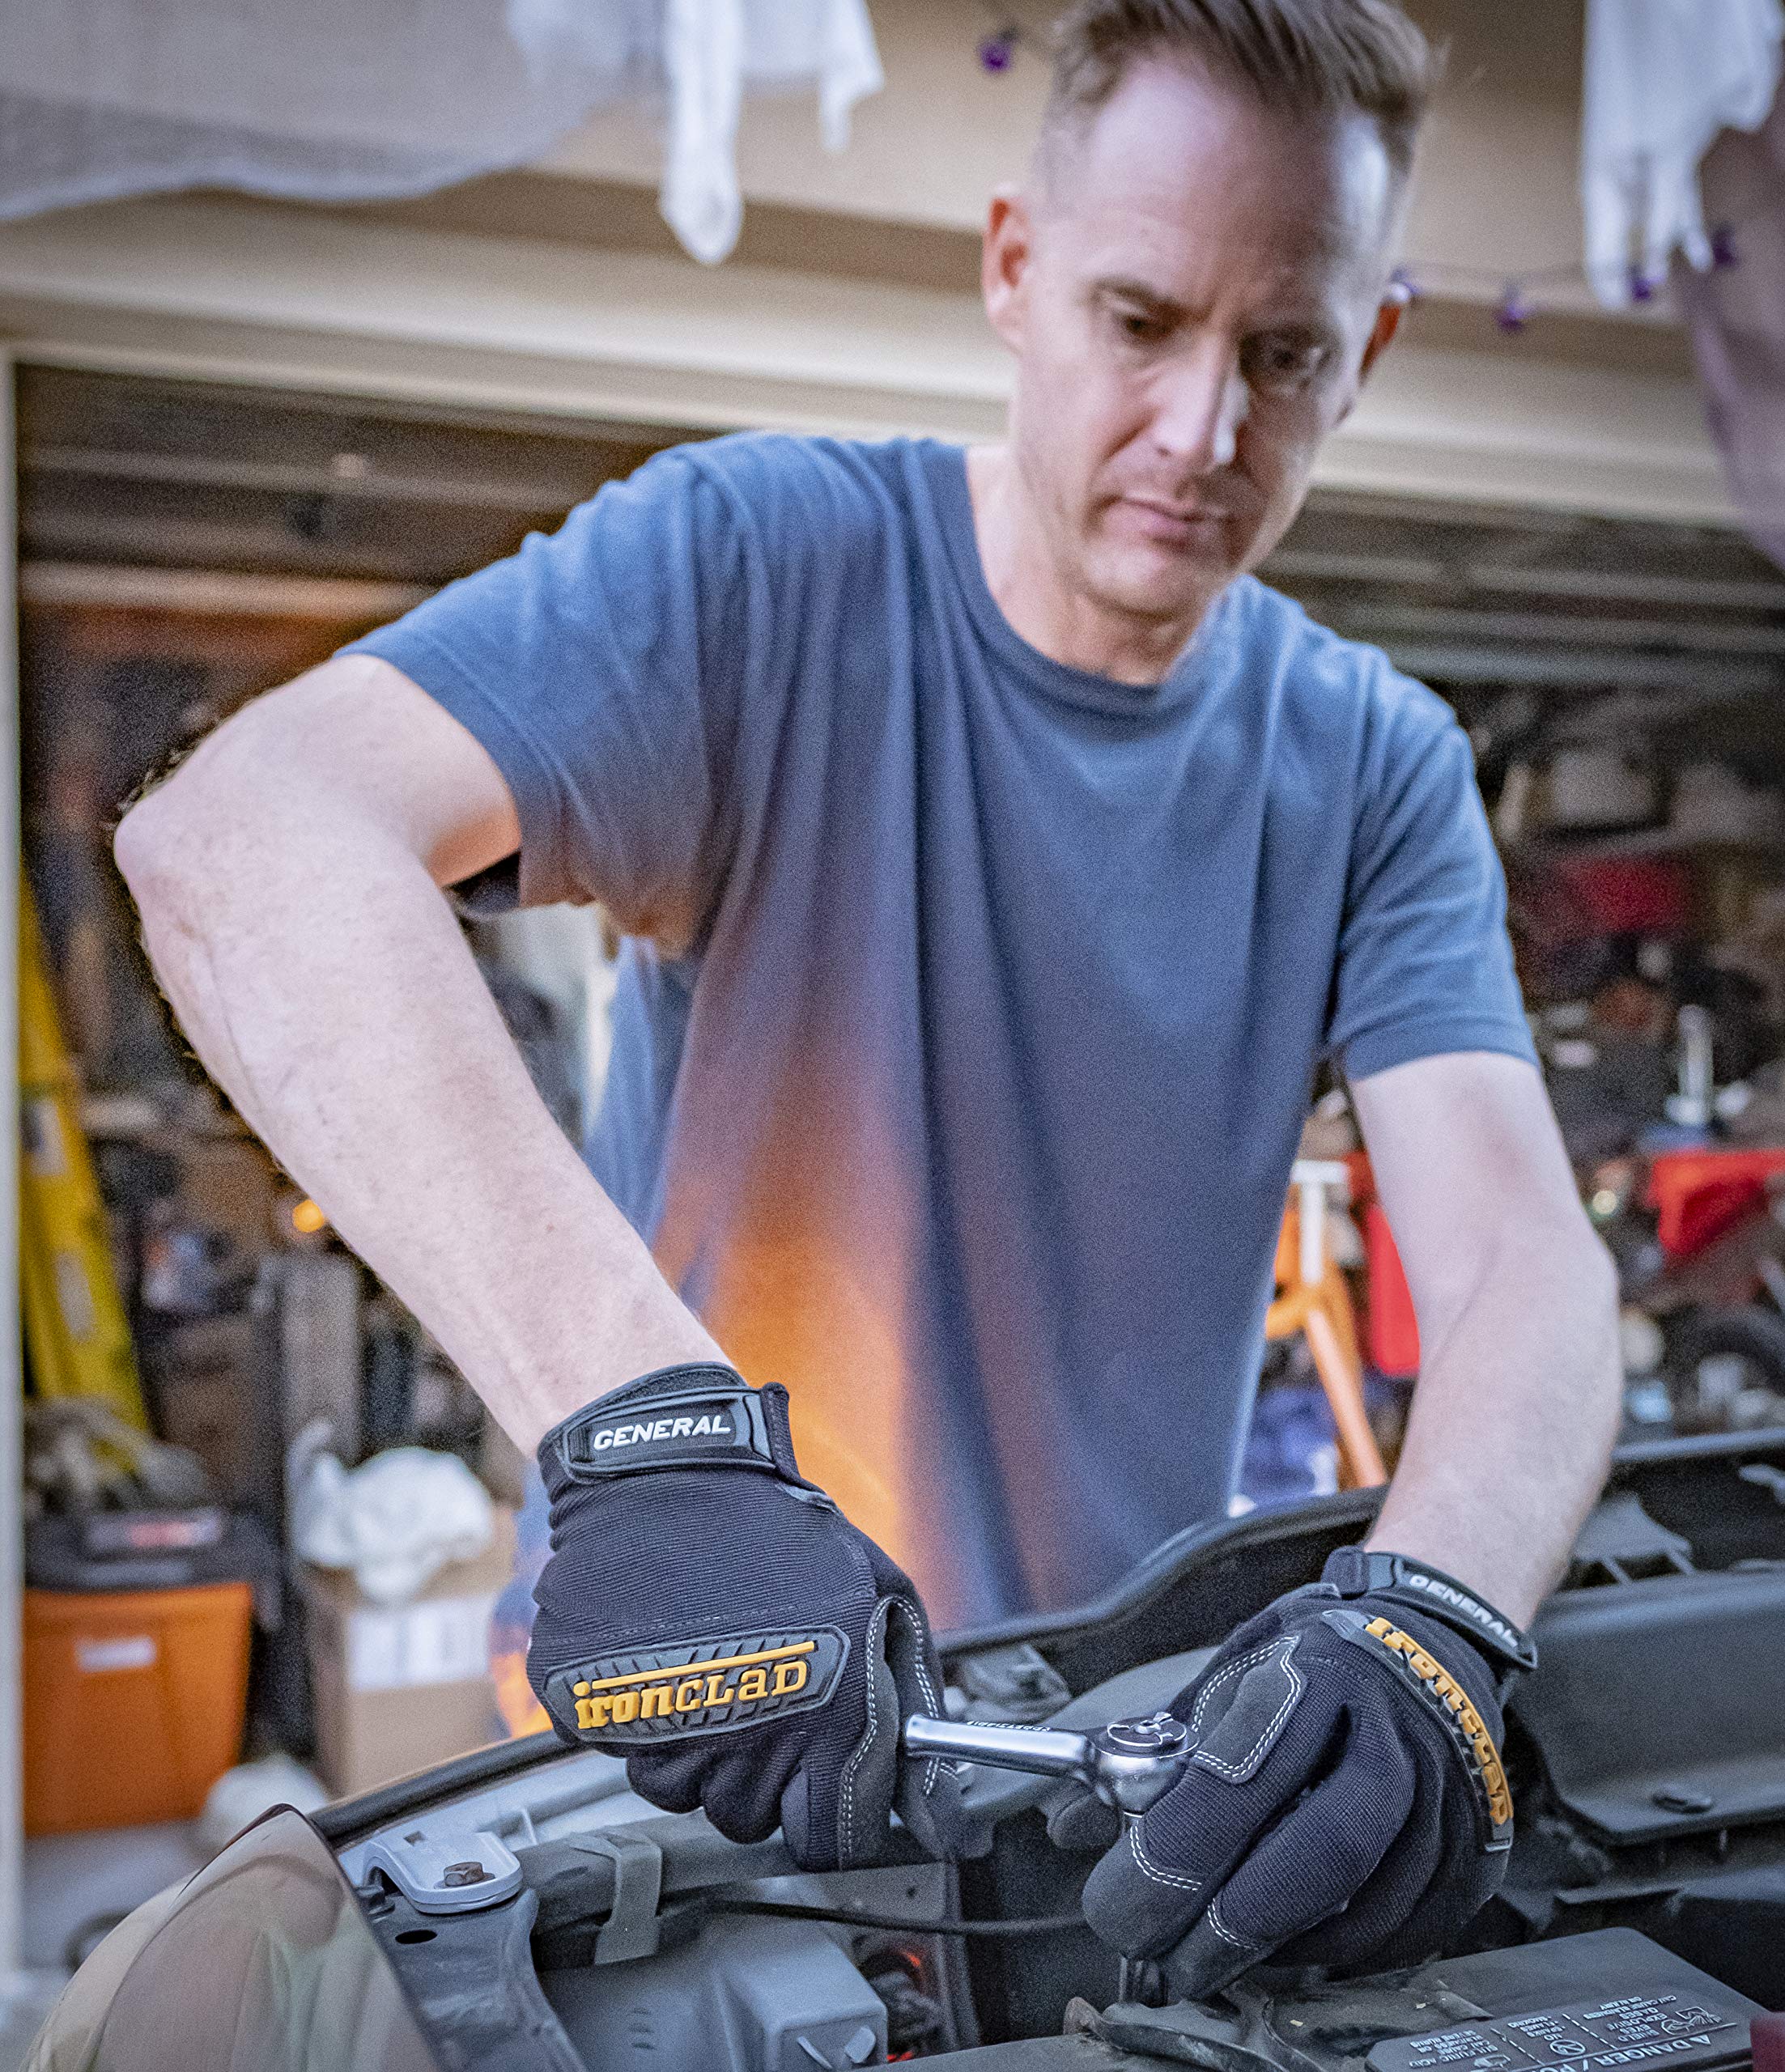 Ironclad General Utility Work Gloves GUG, All-Purpose, Performance Fit, Durable, Machine Washable